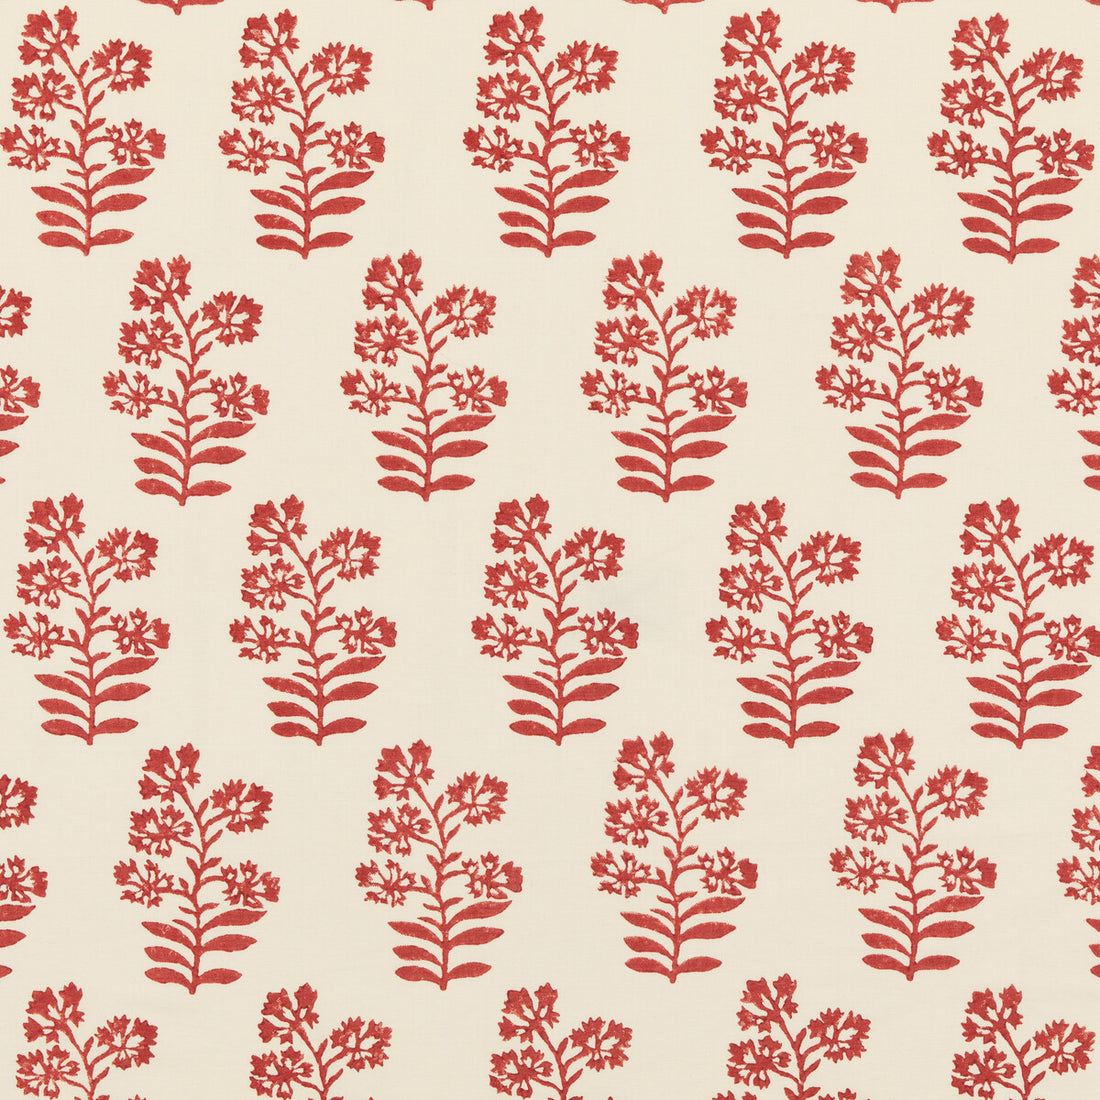 Wild Flower fabric in rustic red color - pattern PP50483.2.0 - by Baker Lifestyle in the Block Party collection